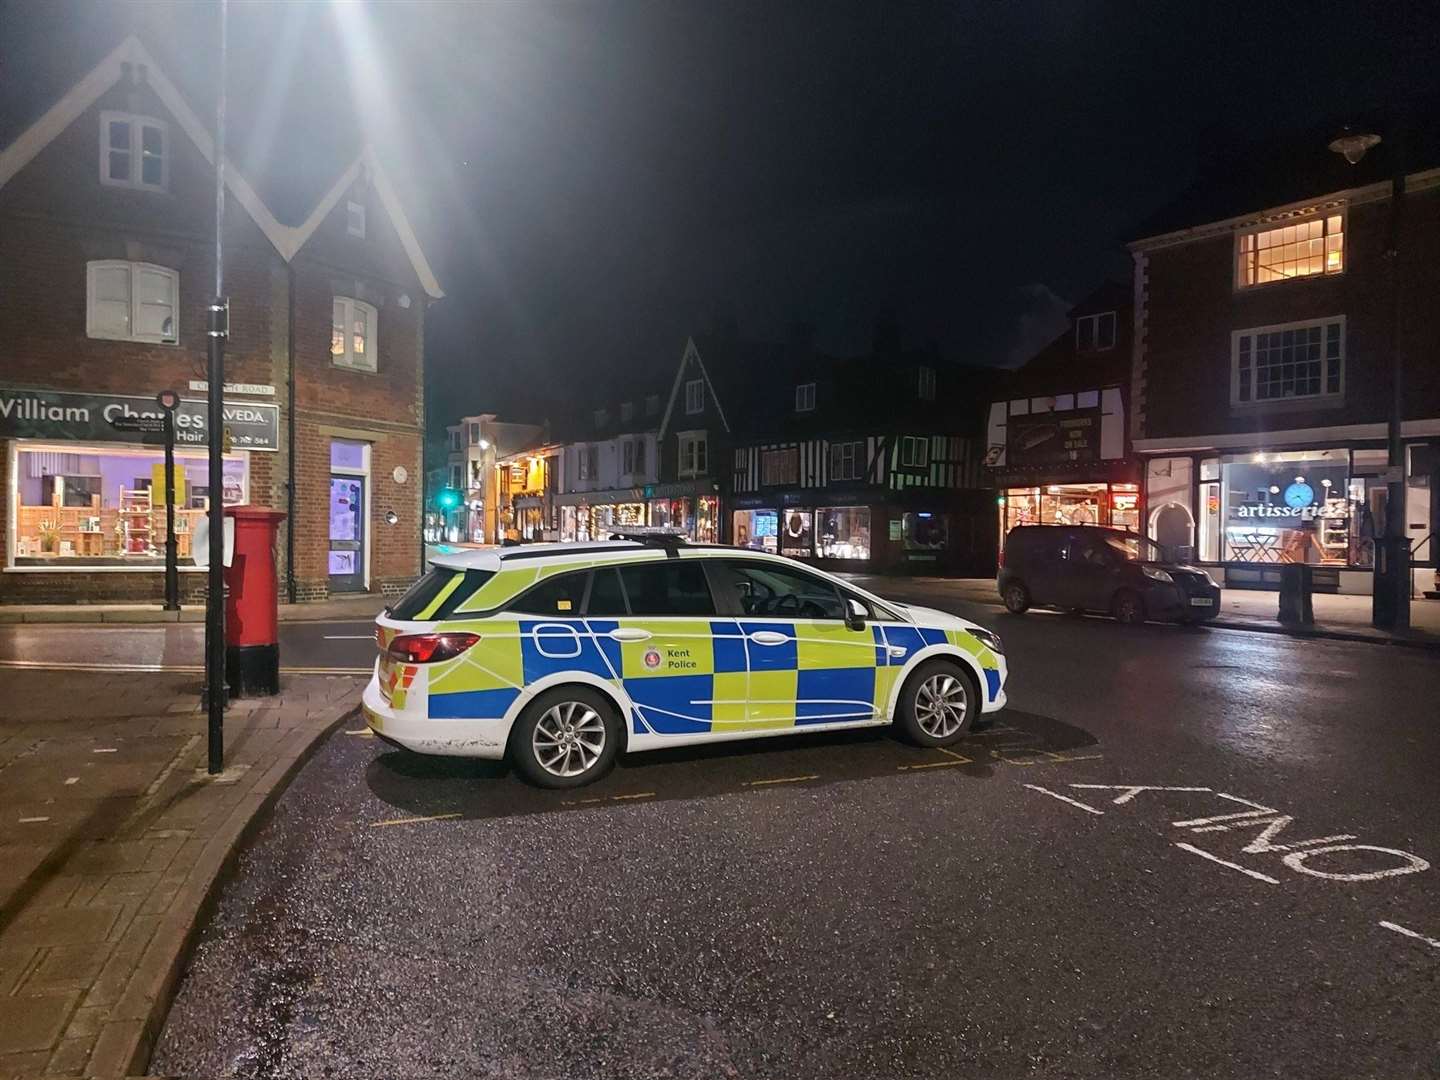 Earlier this month, Kent Police tweeted images to show an increased police presence in the area to "reassure residents, patrons and visitors to this wonderful town and prevent any further offences in Tenterden"